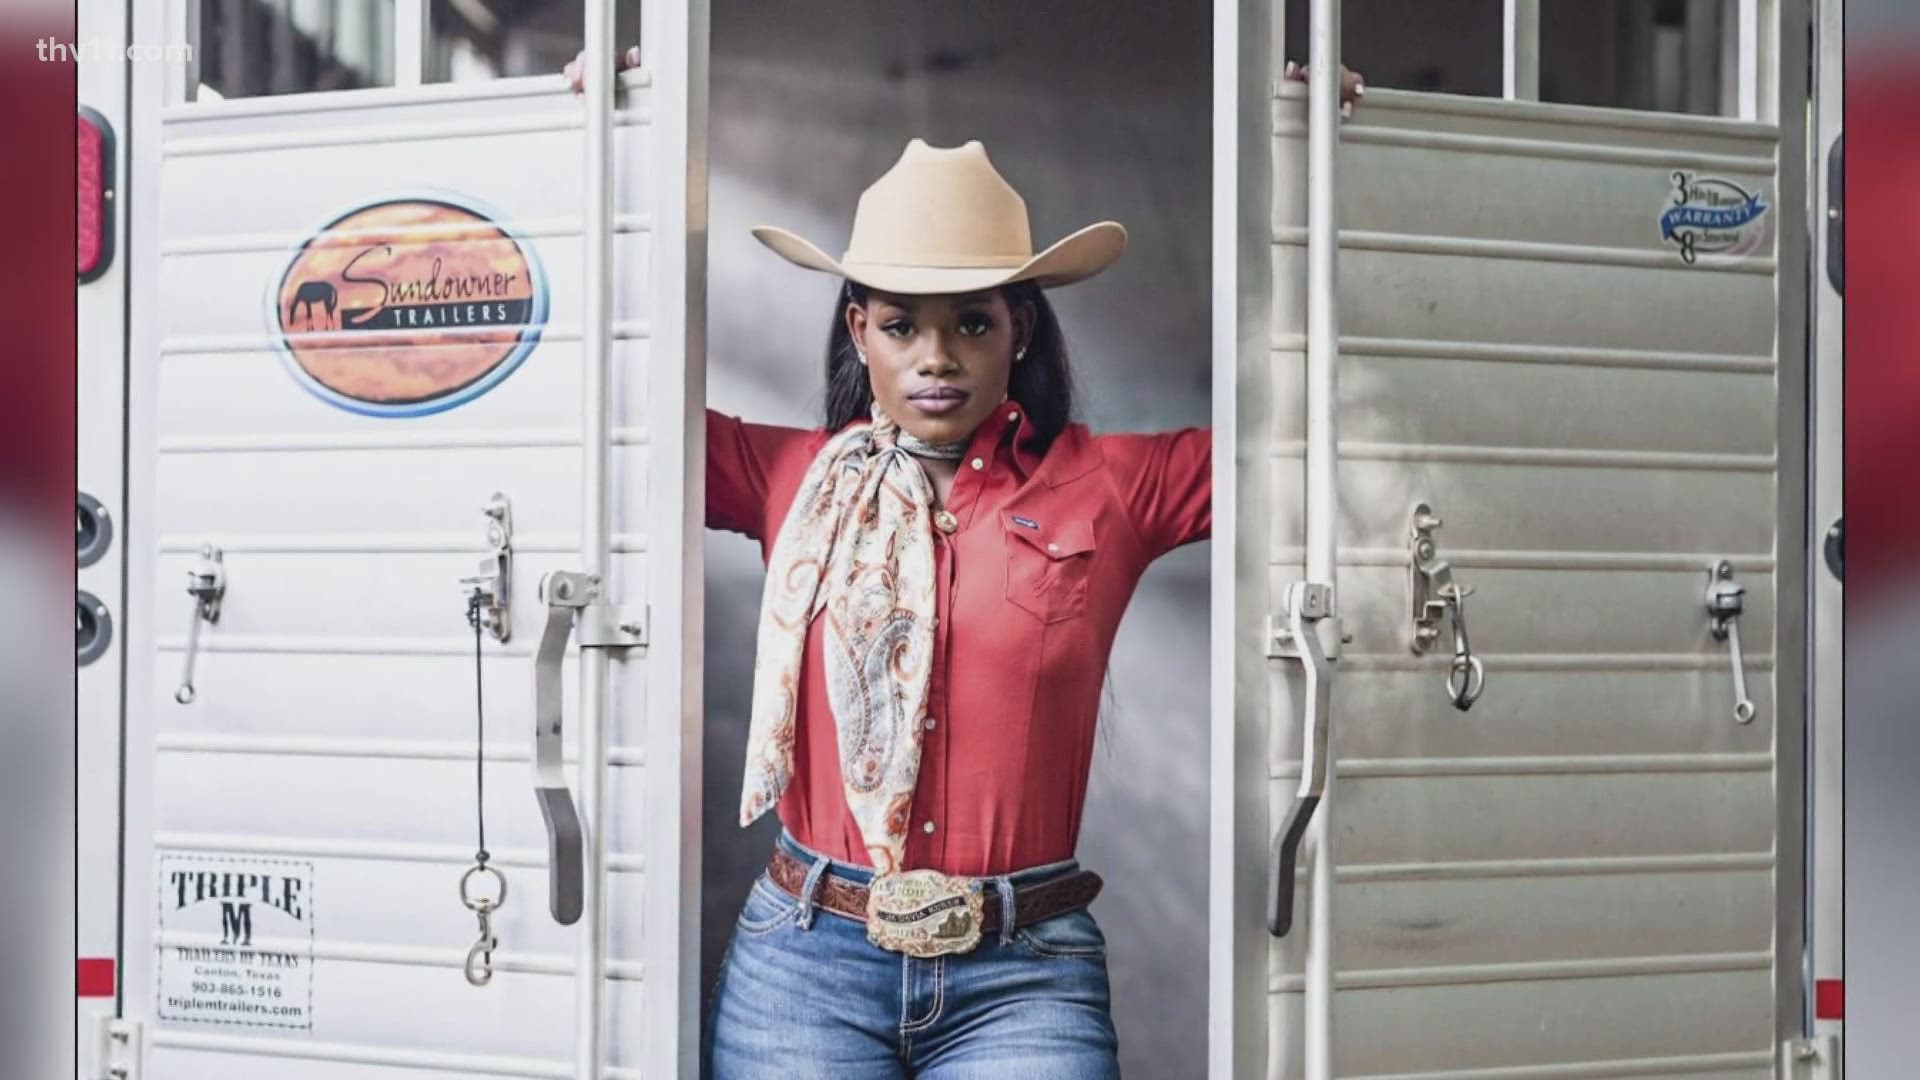 Ja'Dayia Kursh, a Fort Smith native, was crowned Miss Rodeo Coal Hill Arkansas in 2017 on her 17th birthday.